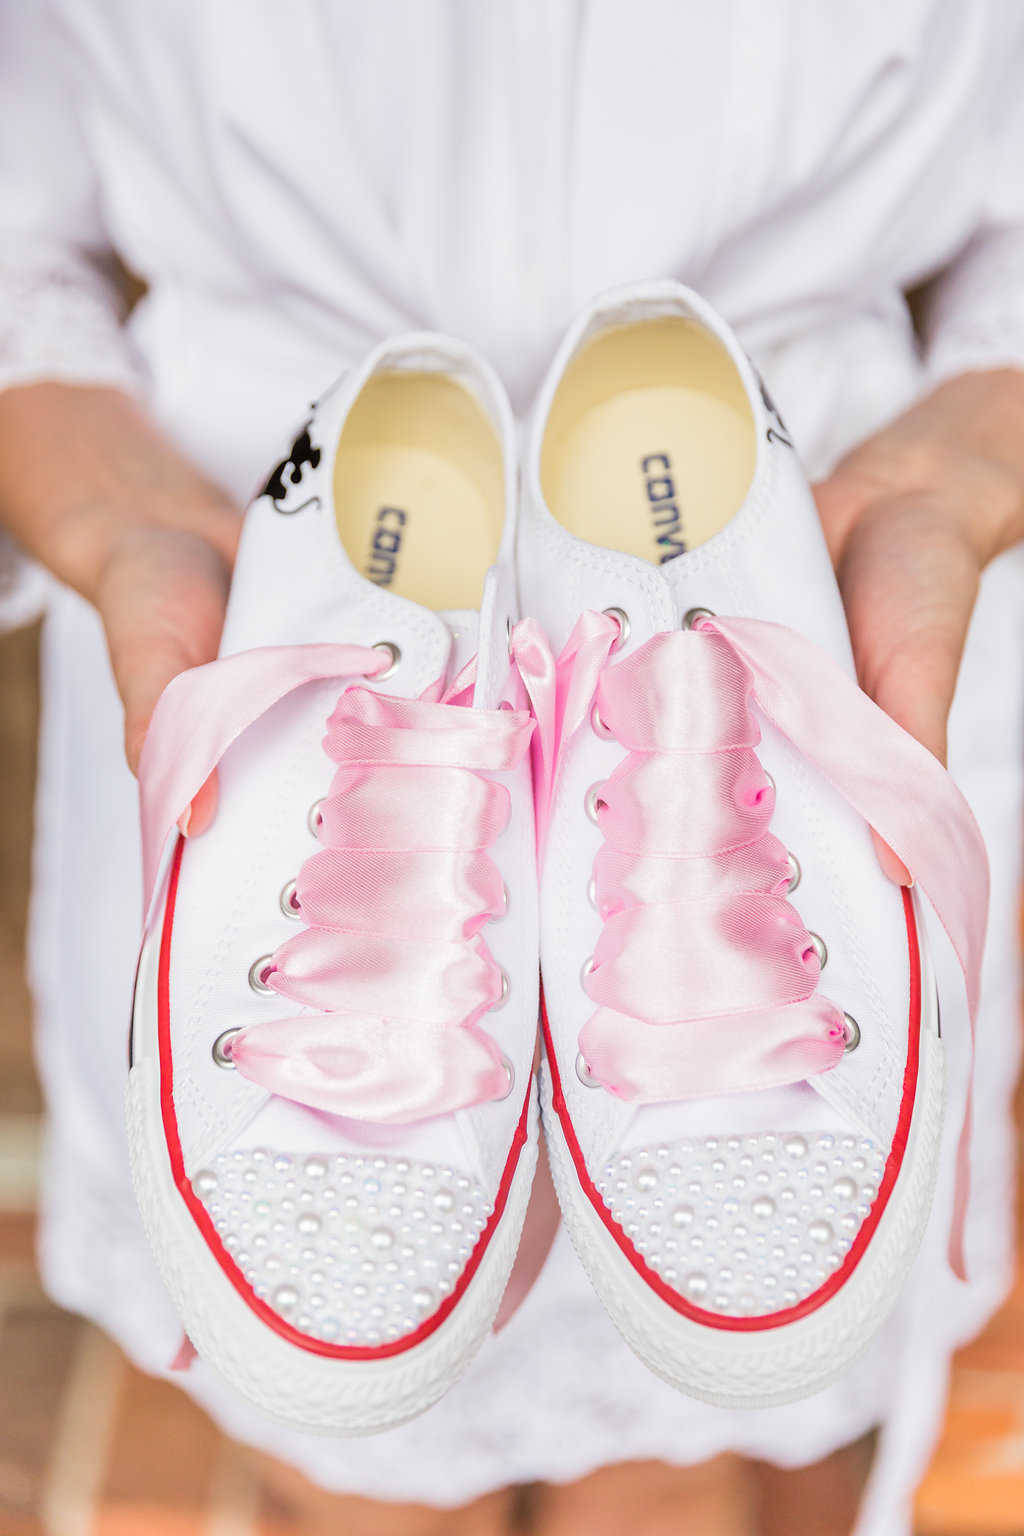 The bride wore custom Team Bride socks with pink satin lace bedazzled converse sneakers